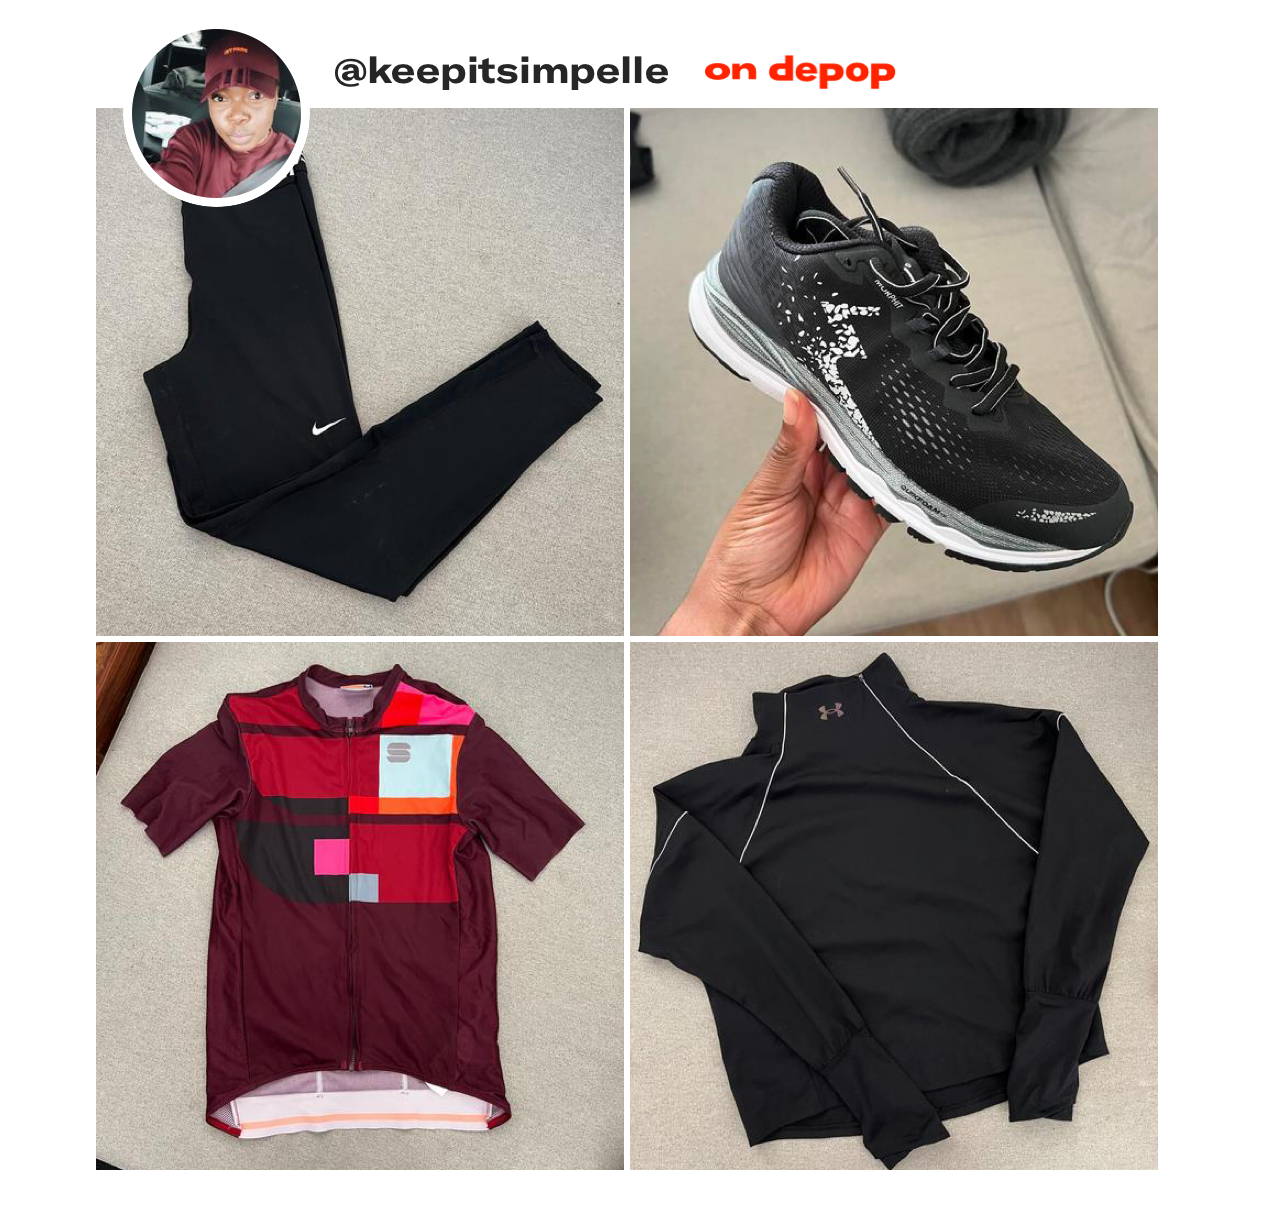 my shop - keep it simpelle - on depop selling cycling kit, active wear, trainers and more fit kit. 